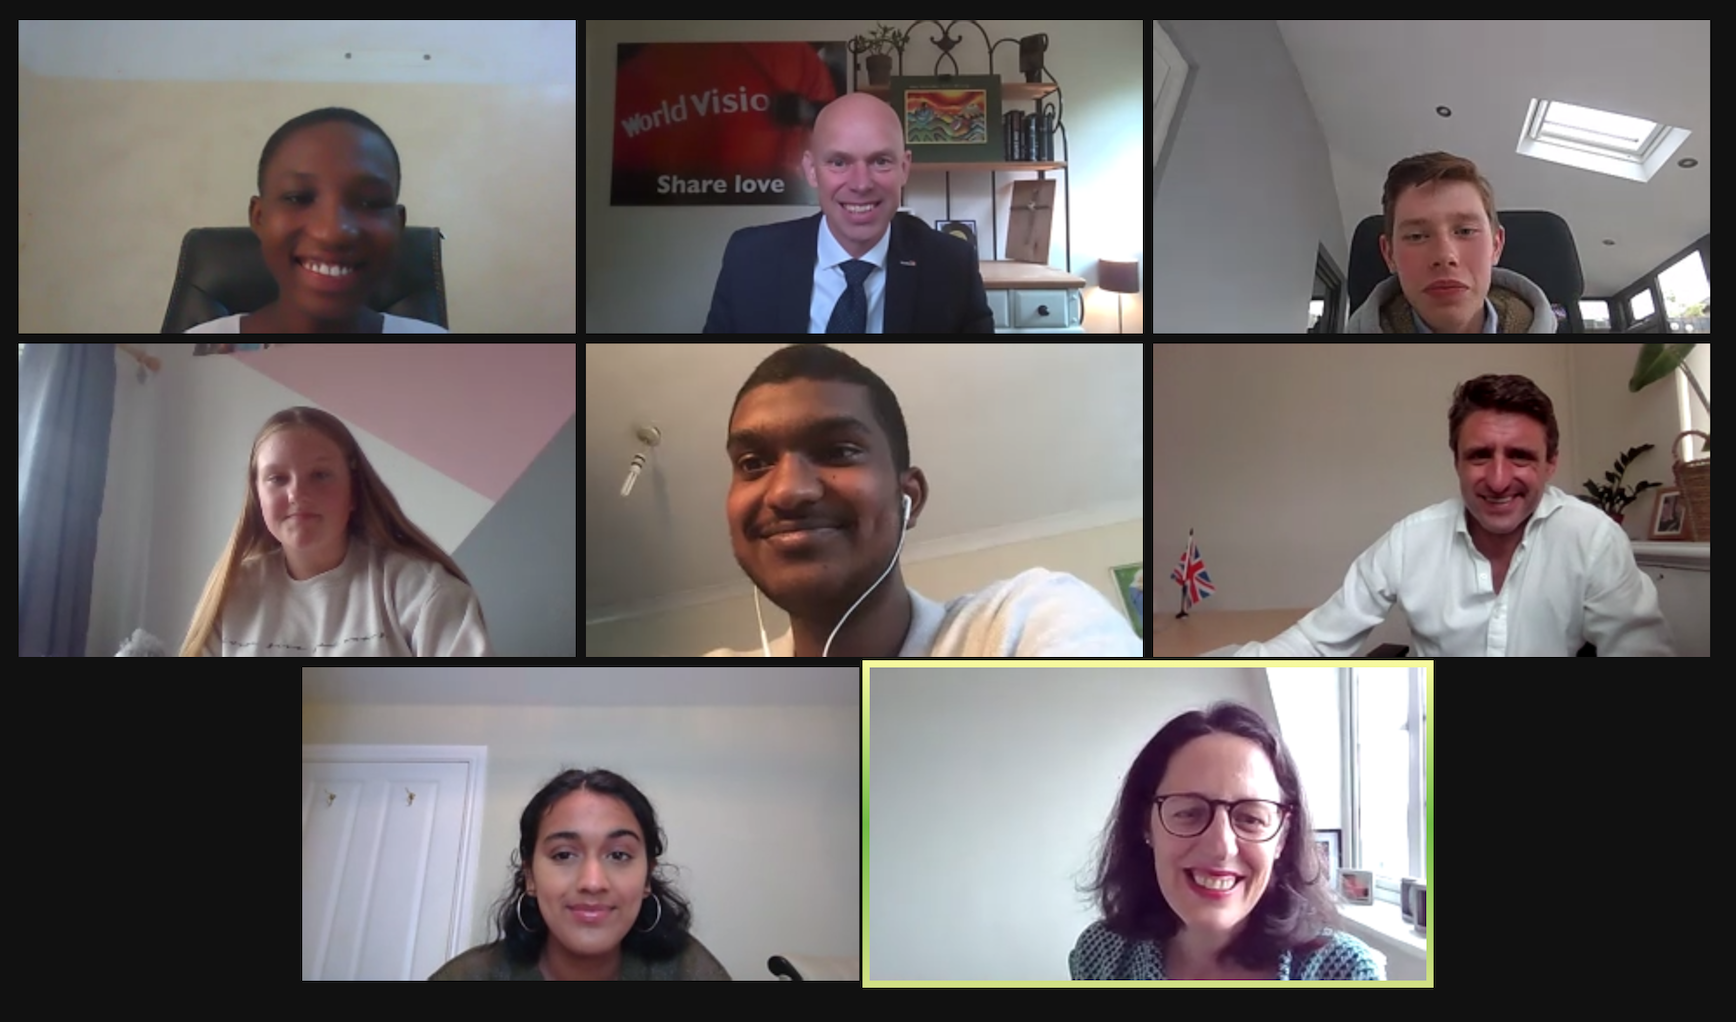 Still image from Zoom conference call, showing some of the young people, MK North MP and World Vision staff